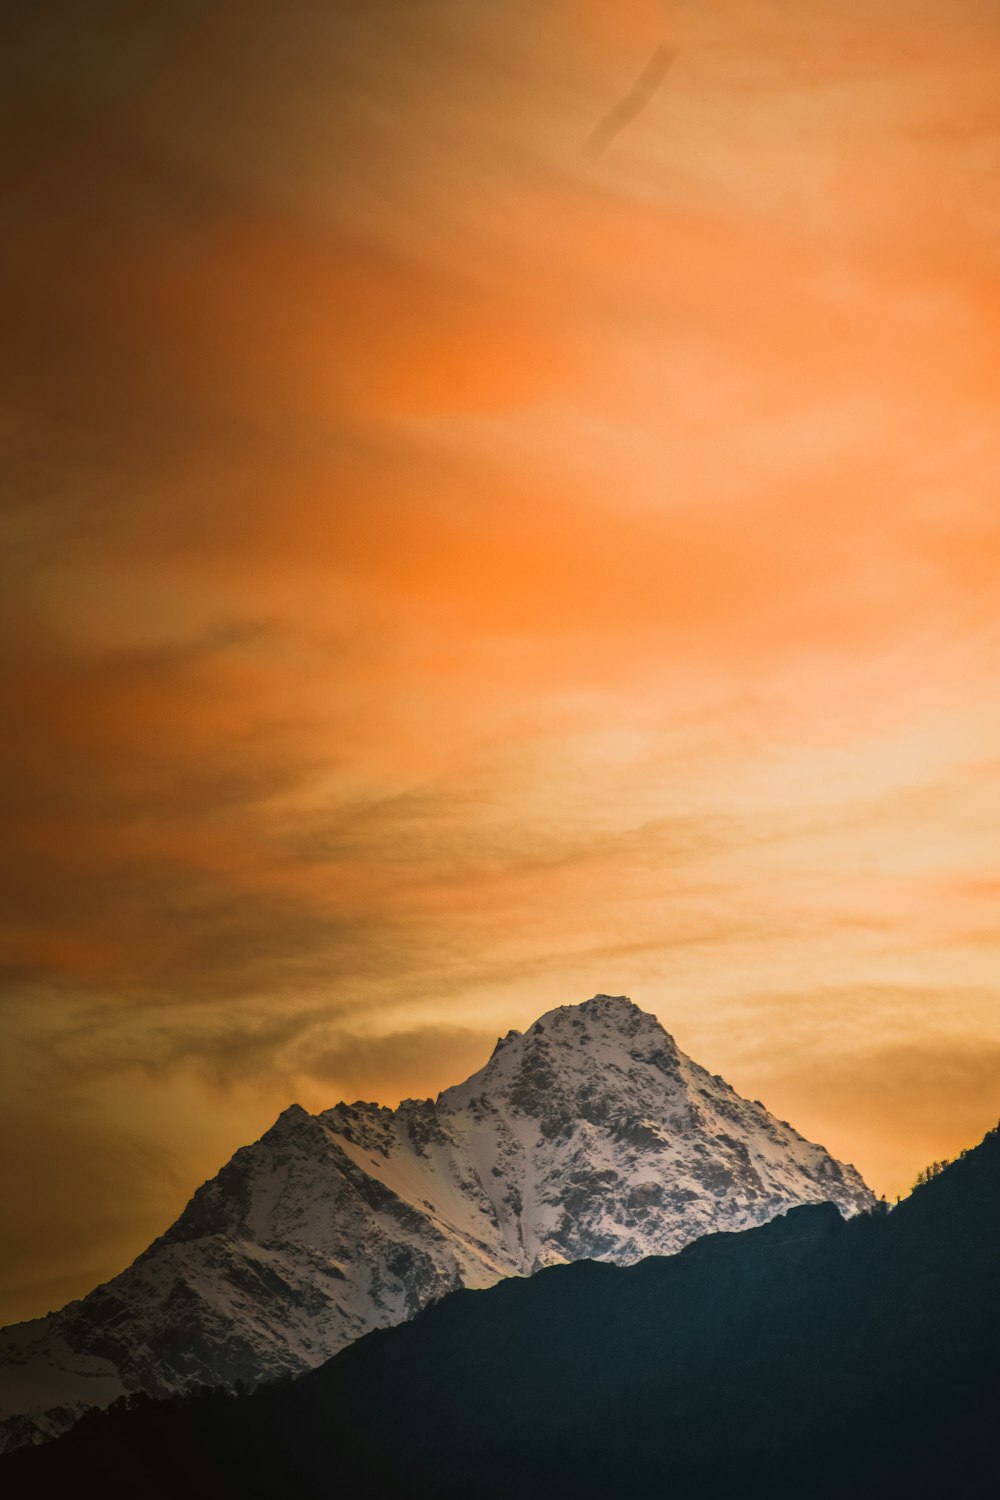 mountain covered with snow under orange sky